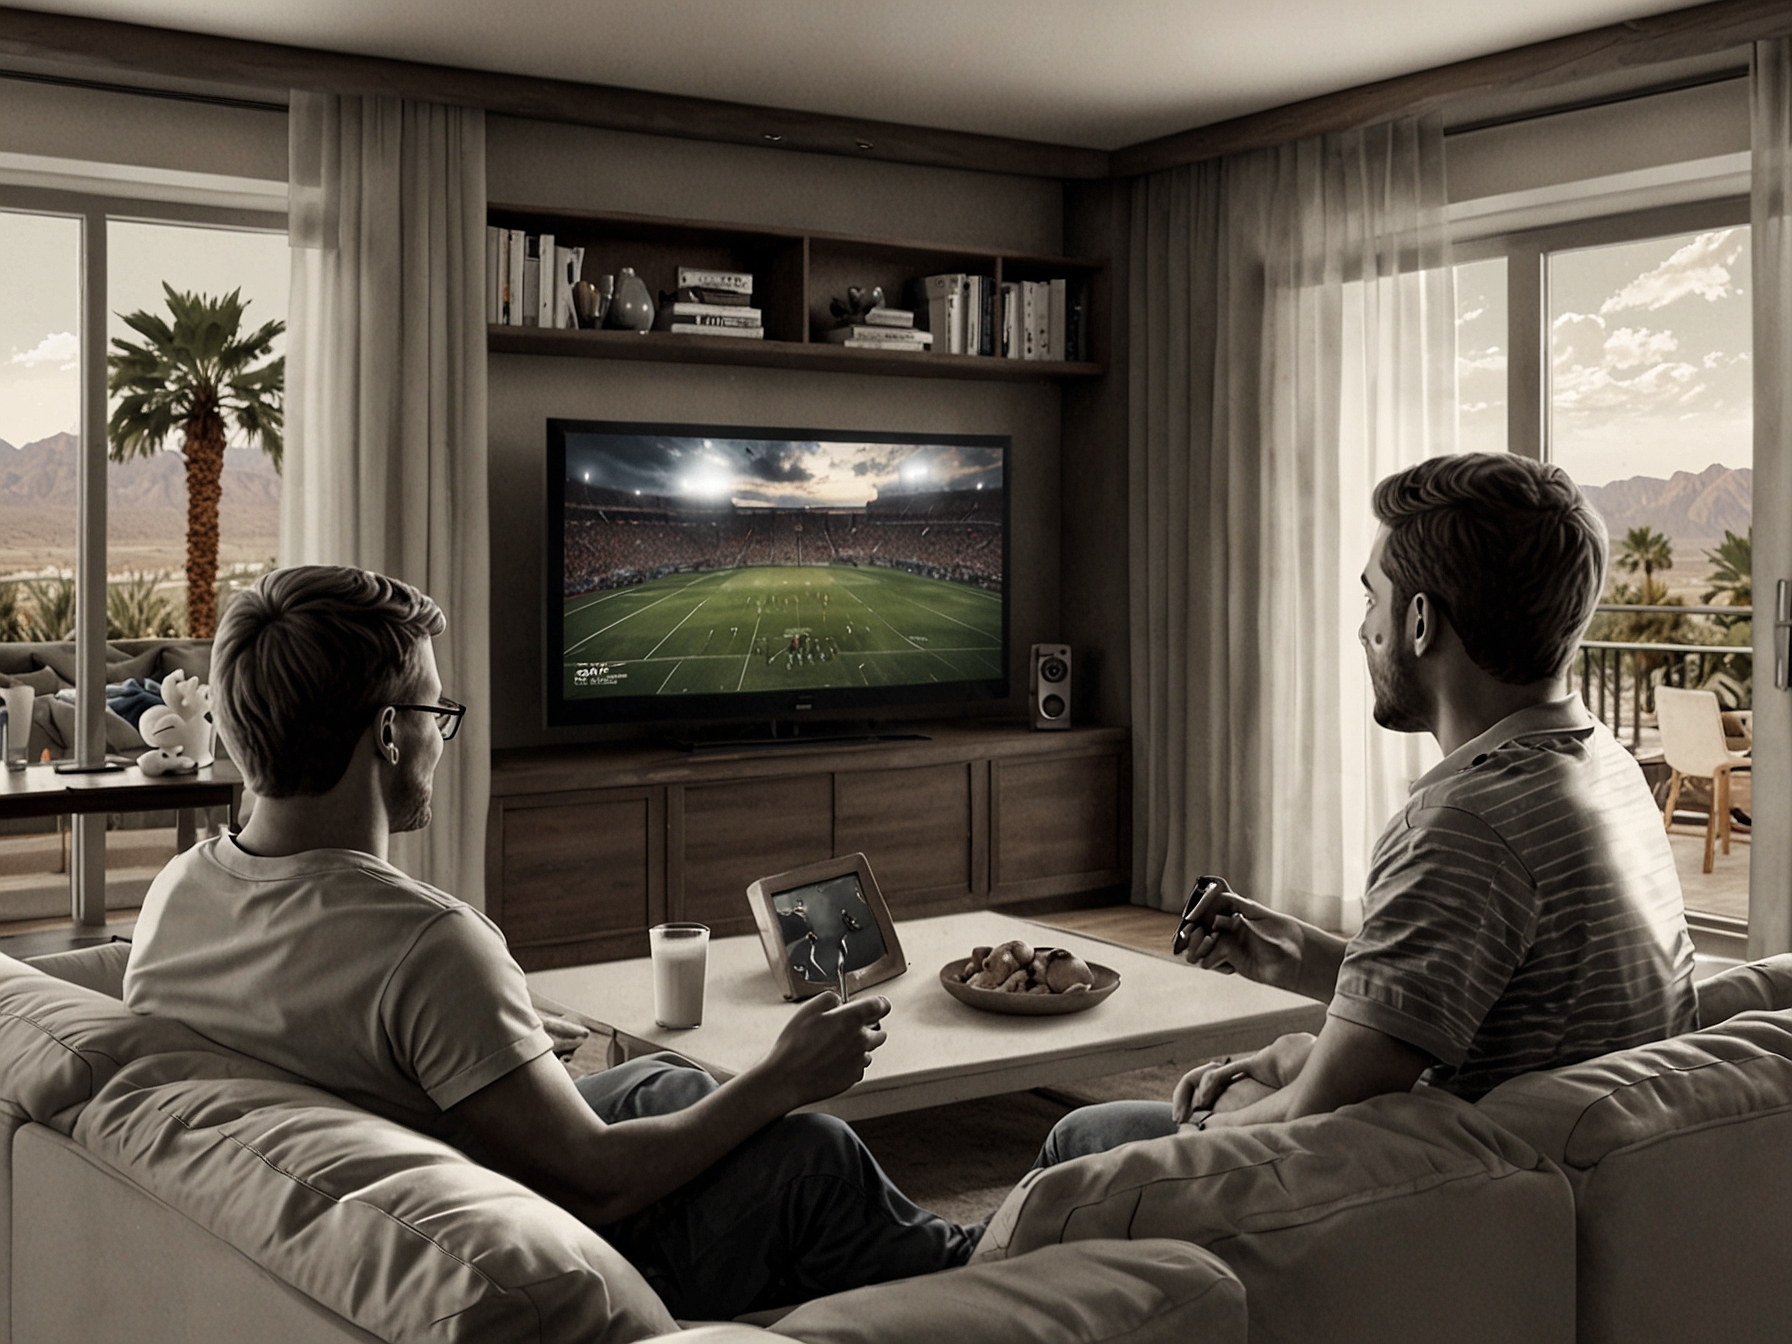 A Las Vegas living room setup with a family watching an intense football game on a large flat-screen TV. The scene captures the excitement and convenience of accessing various sports channels at home.